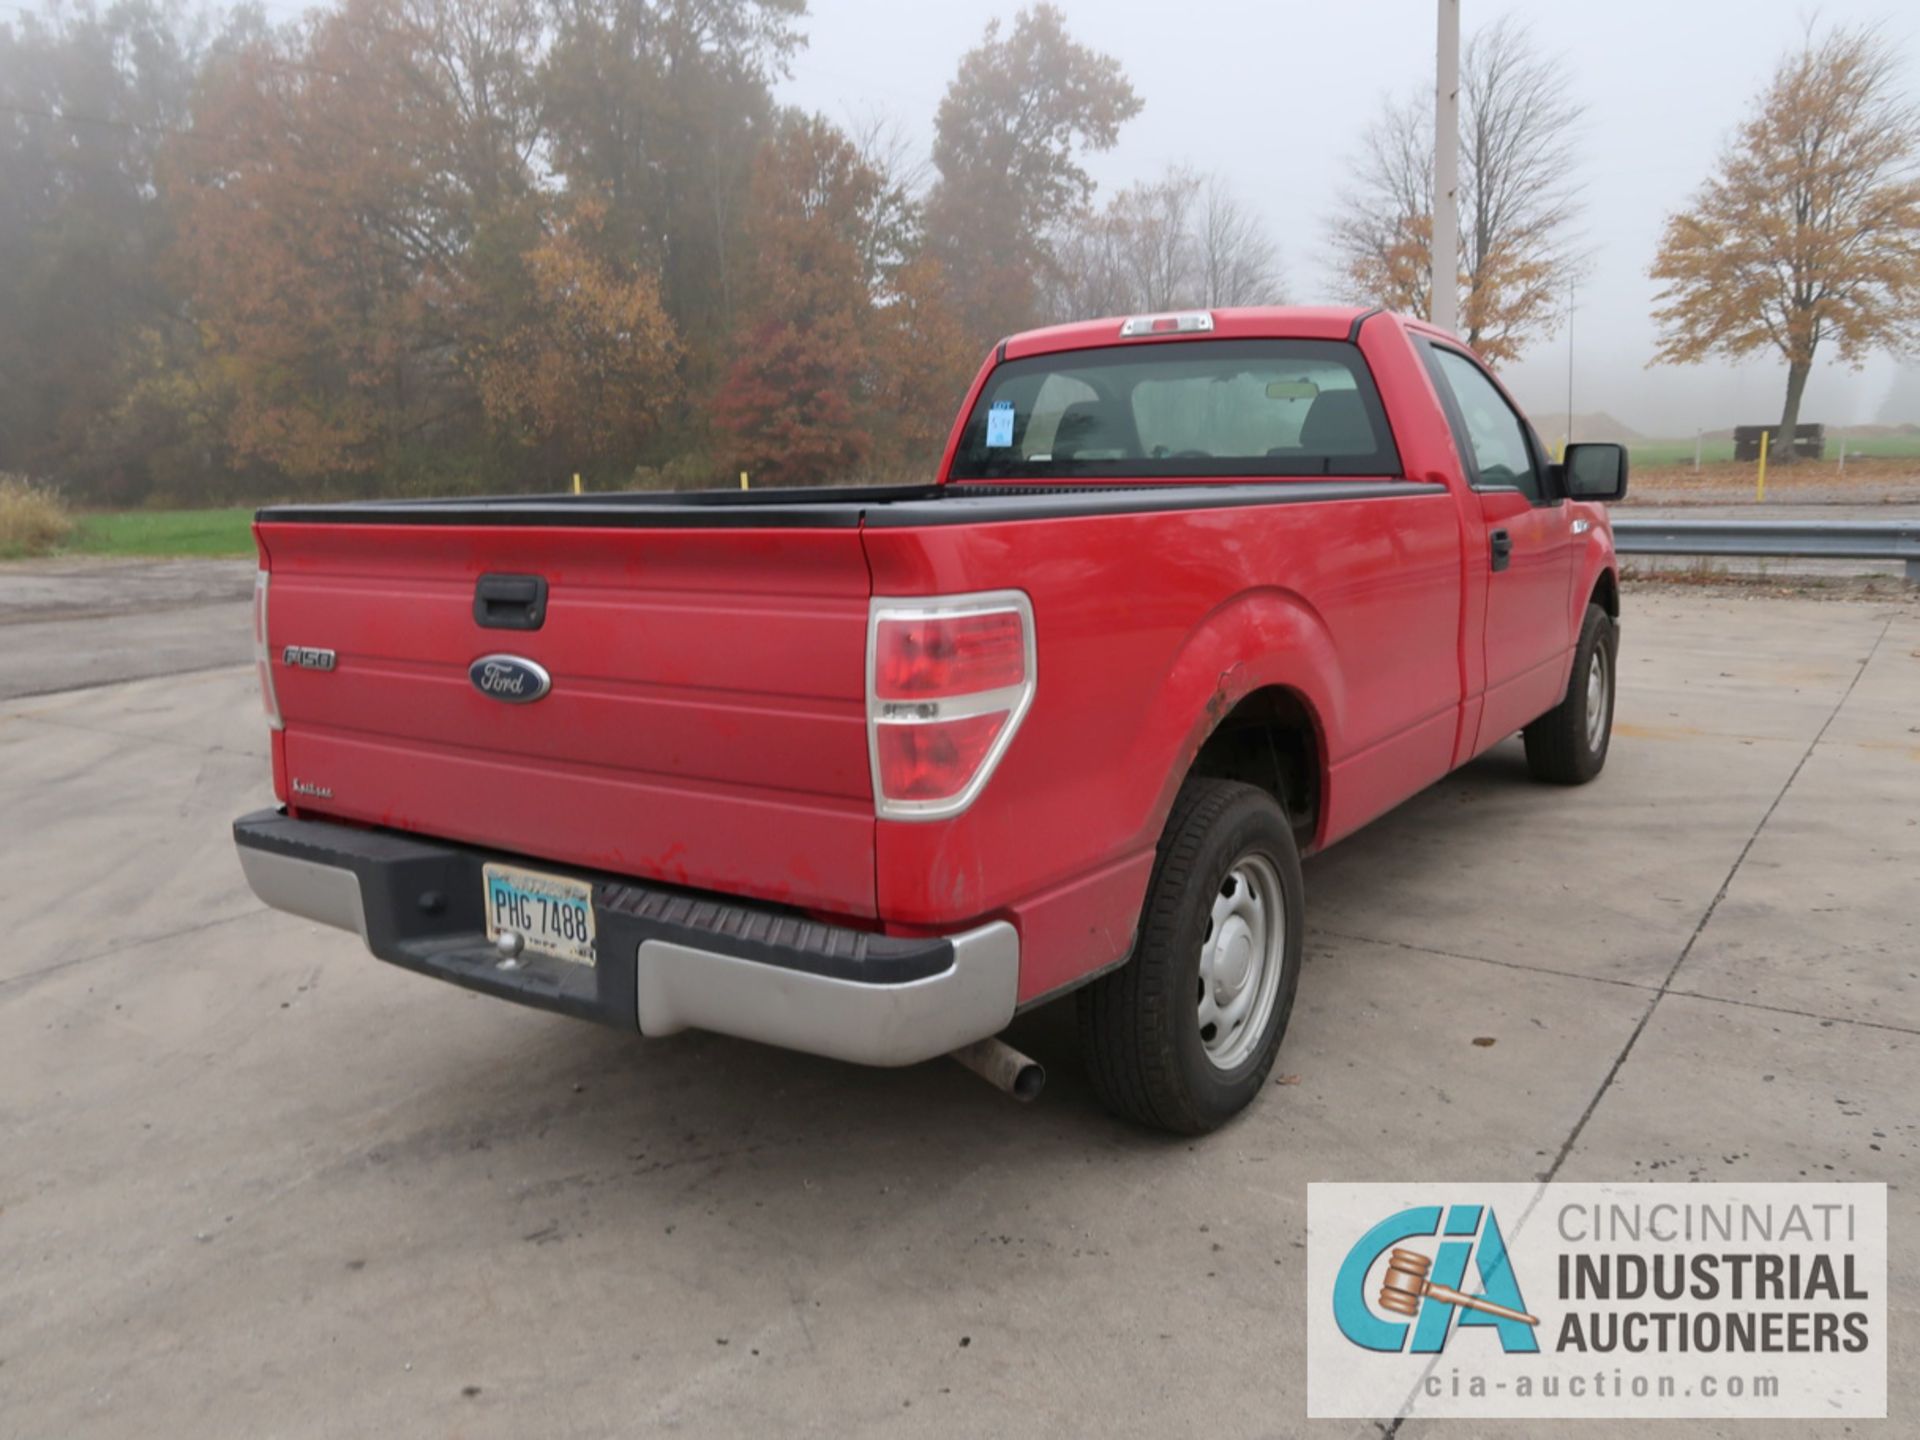 2010 FORD F-150 PICK UP TRUCK; VIN # 1FTMF1CW3AKE02719, 4.62 TRITON GAS ENGINE, AUTOMATIC - Image 5 of 12